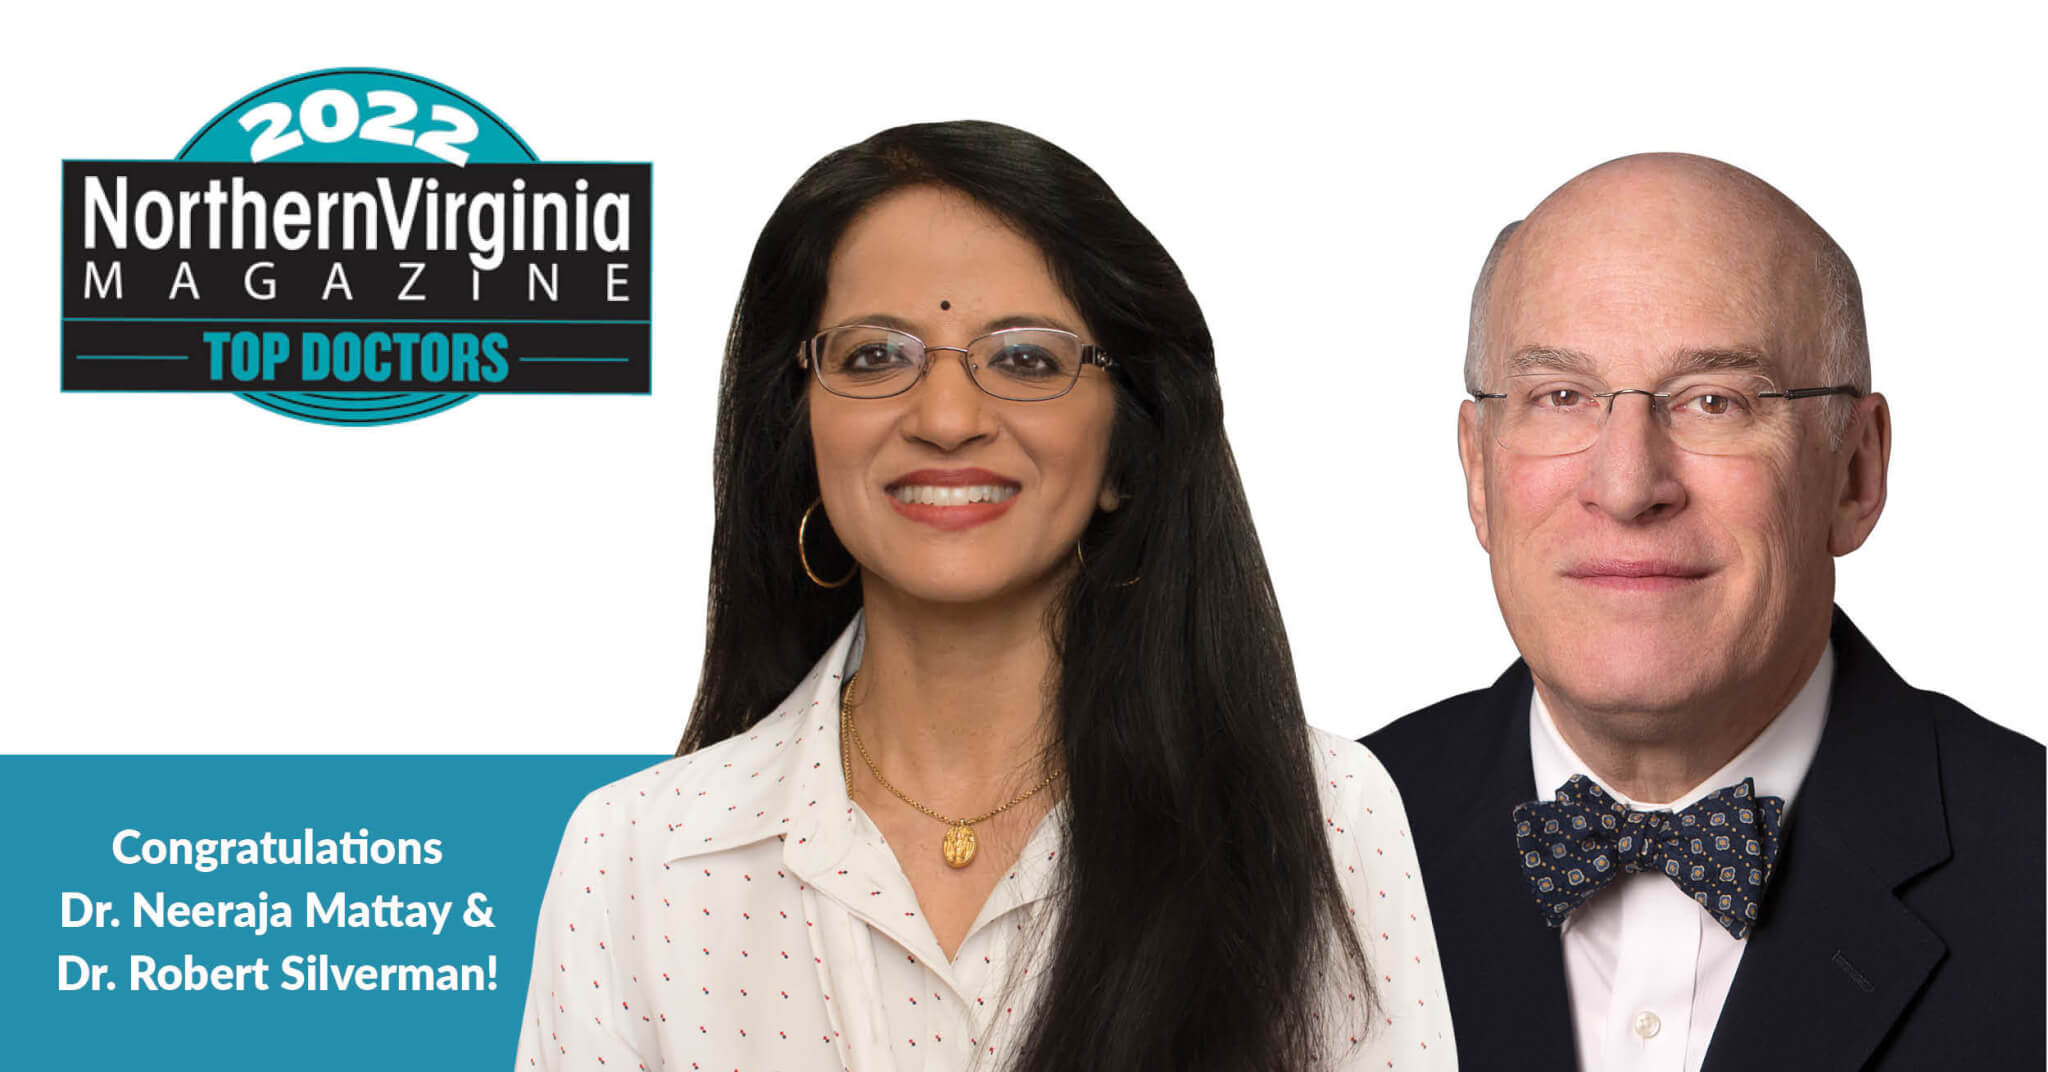 Board-Certified Dermatologists Dr. Neeraja Mattay & Dr. Robert Silverman have been recognized as Northern Virginia Magazine Top Doctors 2022.